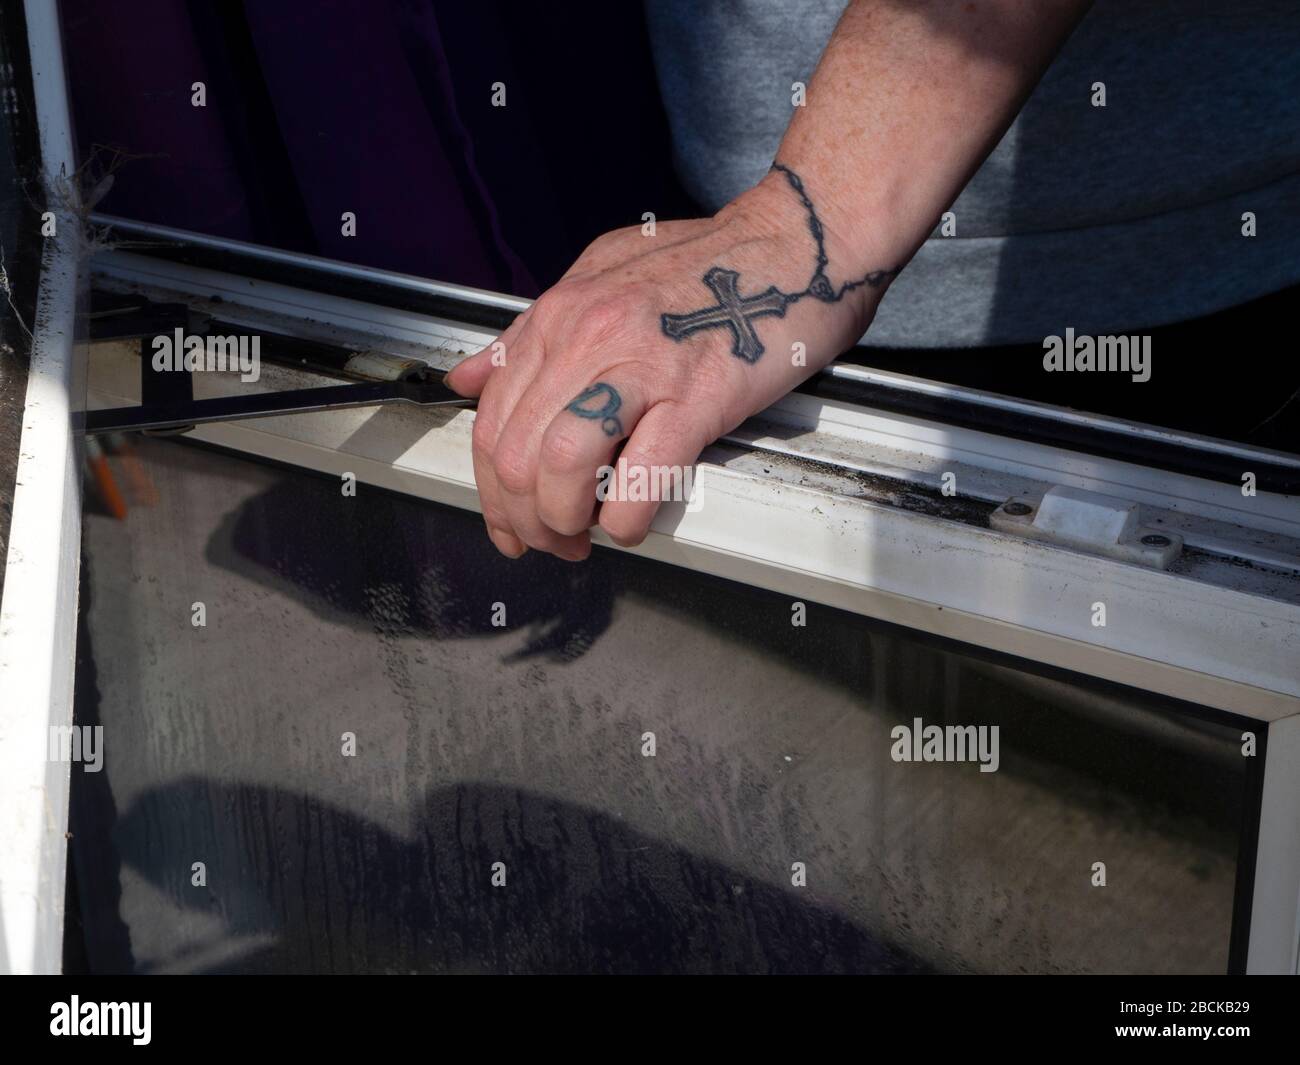 9806 Tattoo Chain Images Stock Photos  Vectors  Shutterstock